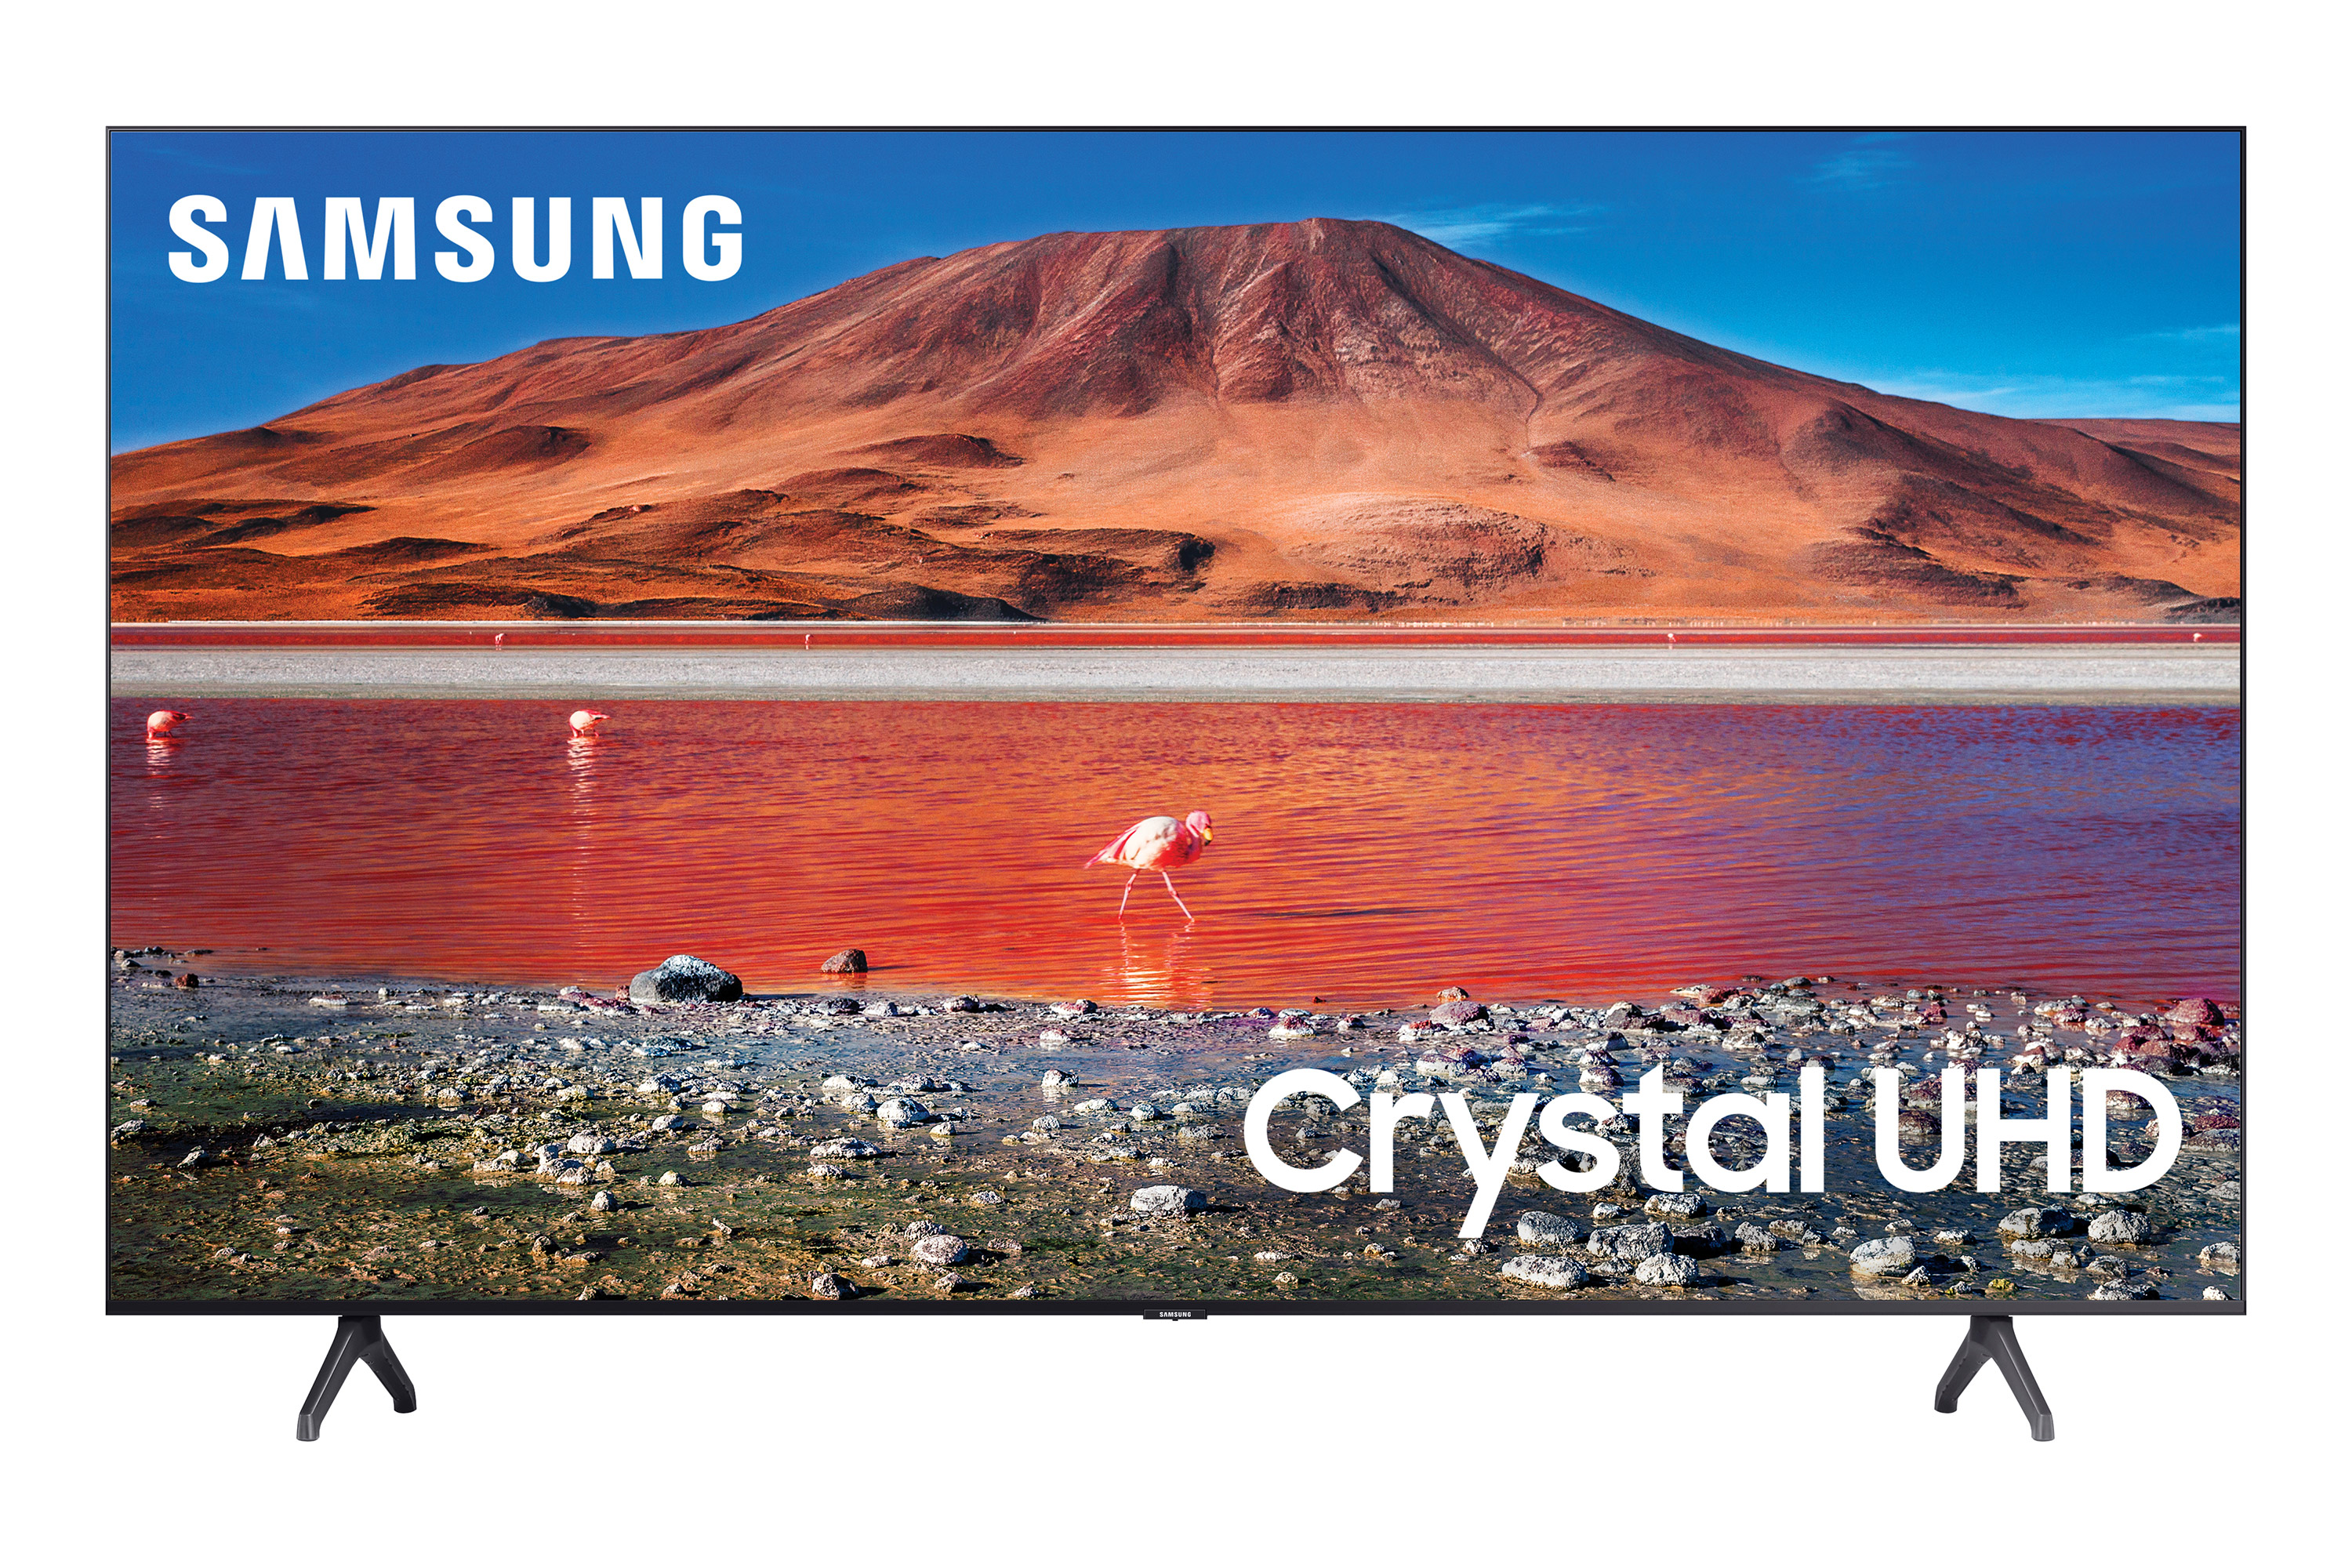 SAMSUNG 50" Class 4K Crystal UHD (2160P) LED Smart TV with HDR UN50TU7000 - image 1 of 9